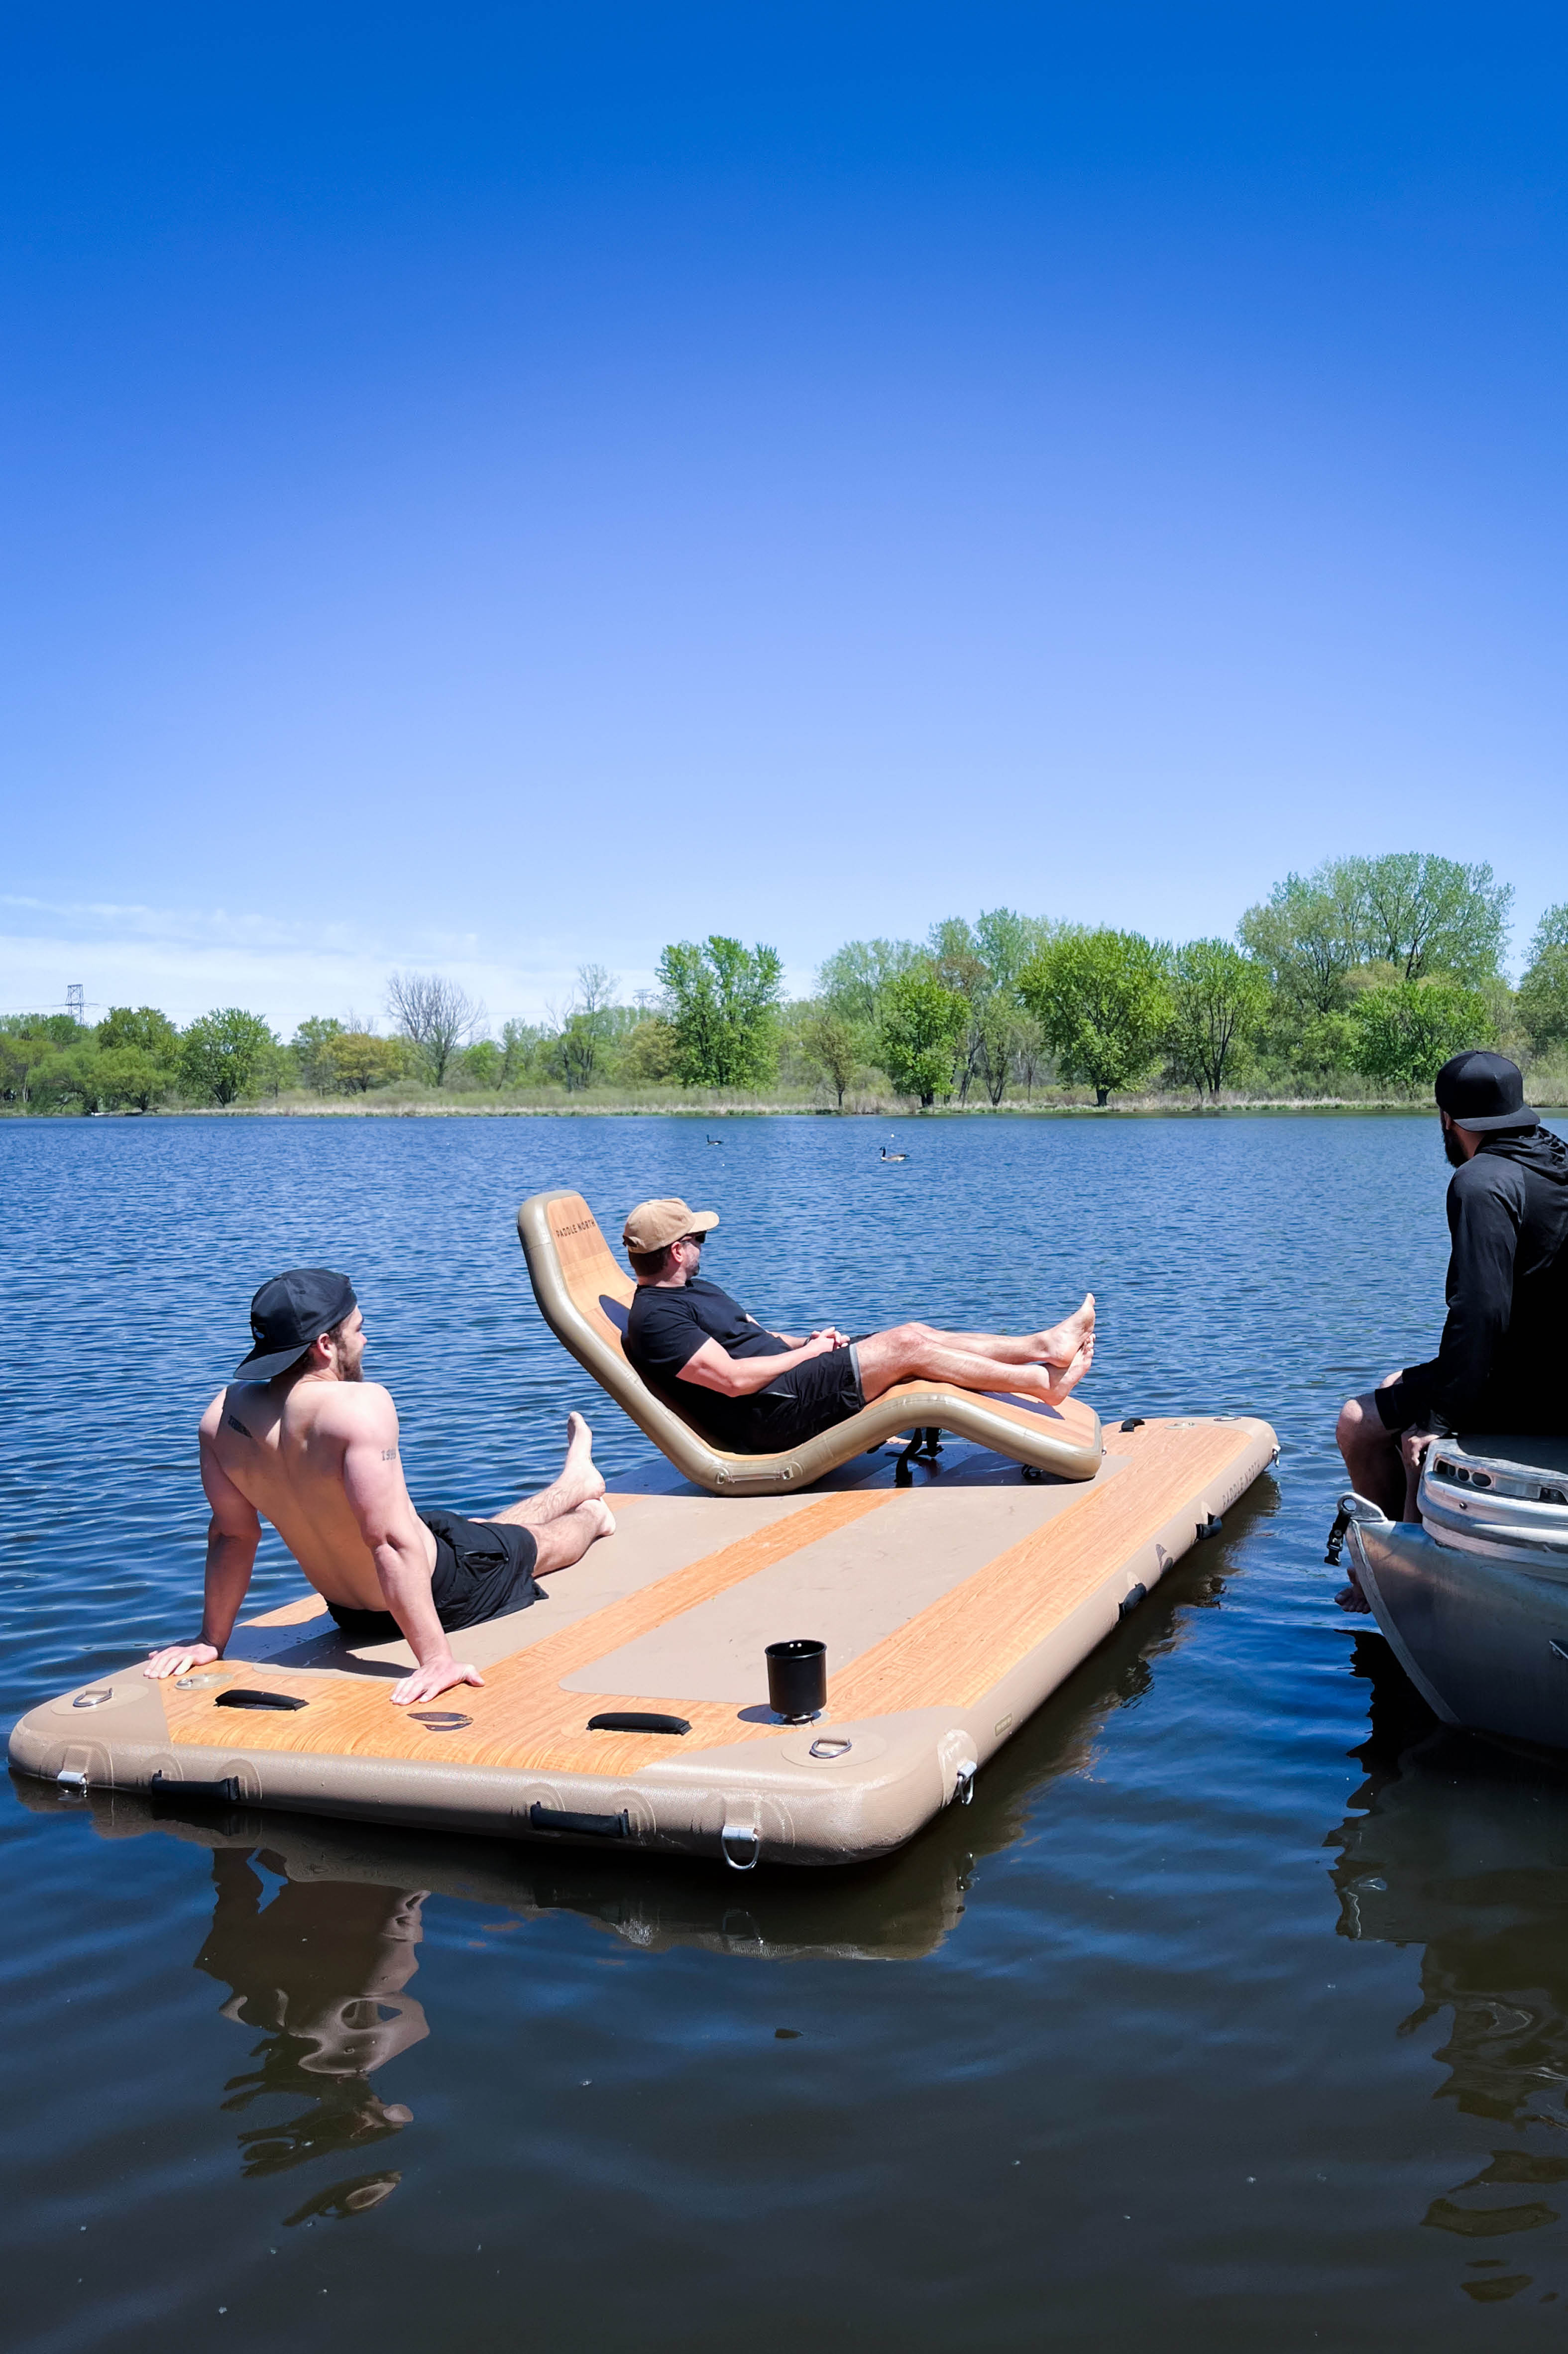 People sitting on an inflatable dock in the water.